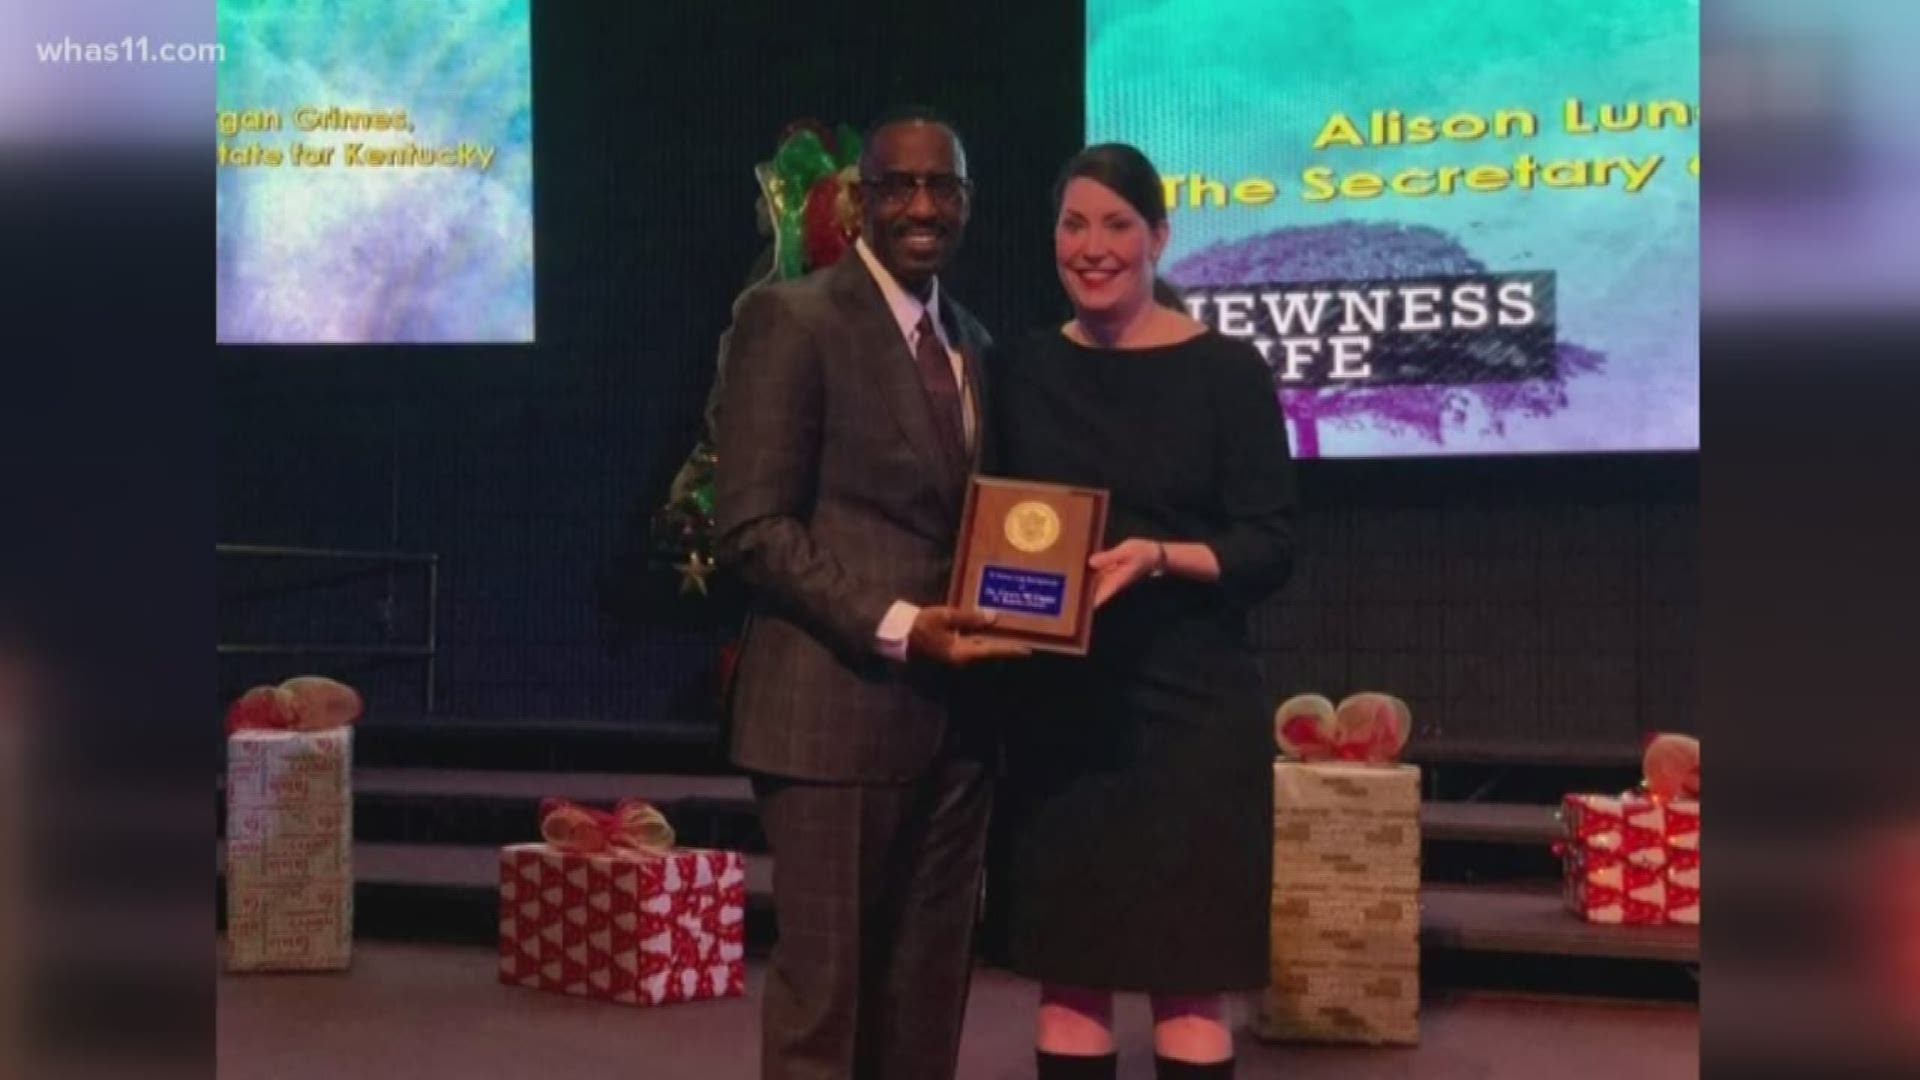 Reverend Kevin Cosby received the Medallion award from Alison Lundergan Grimes, her last as Secretary of State.